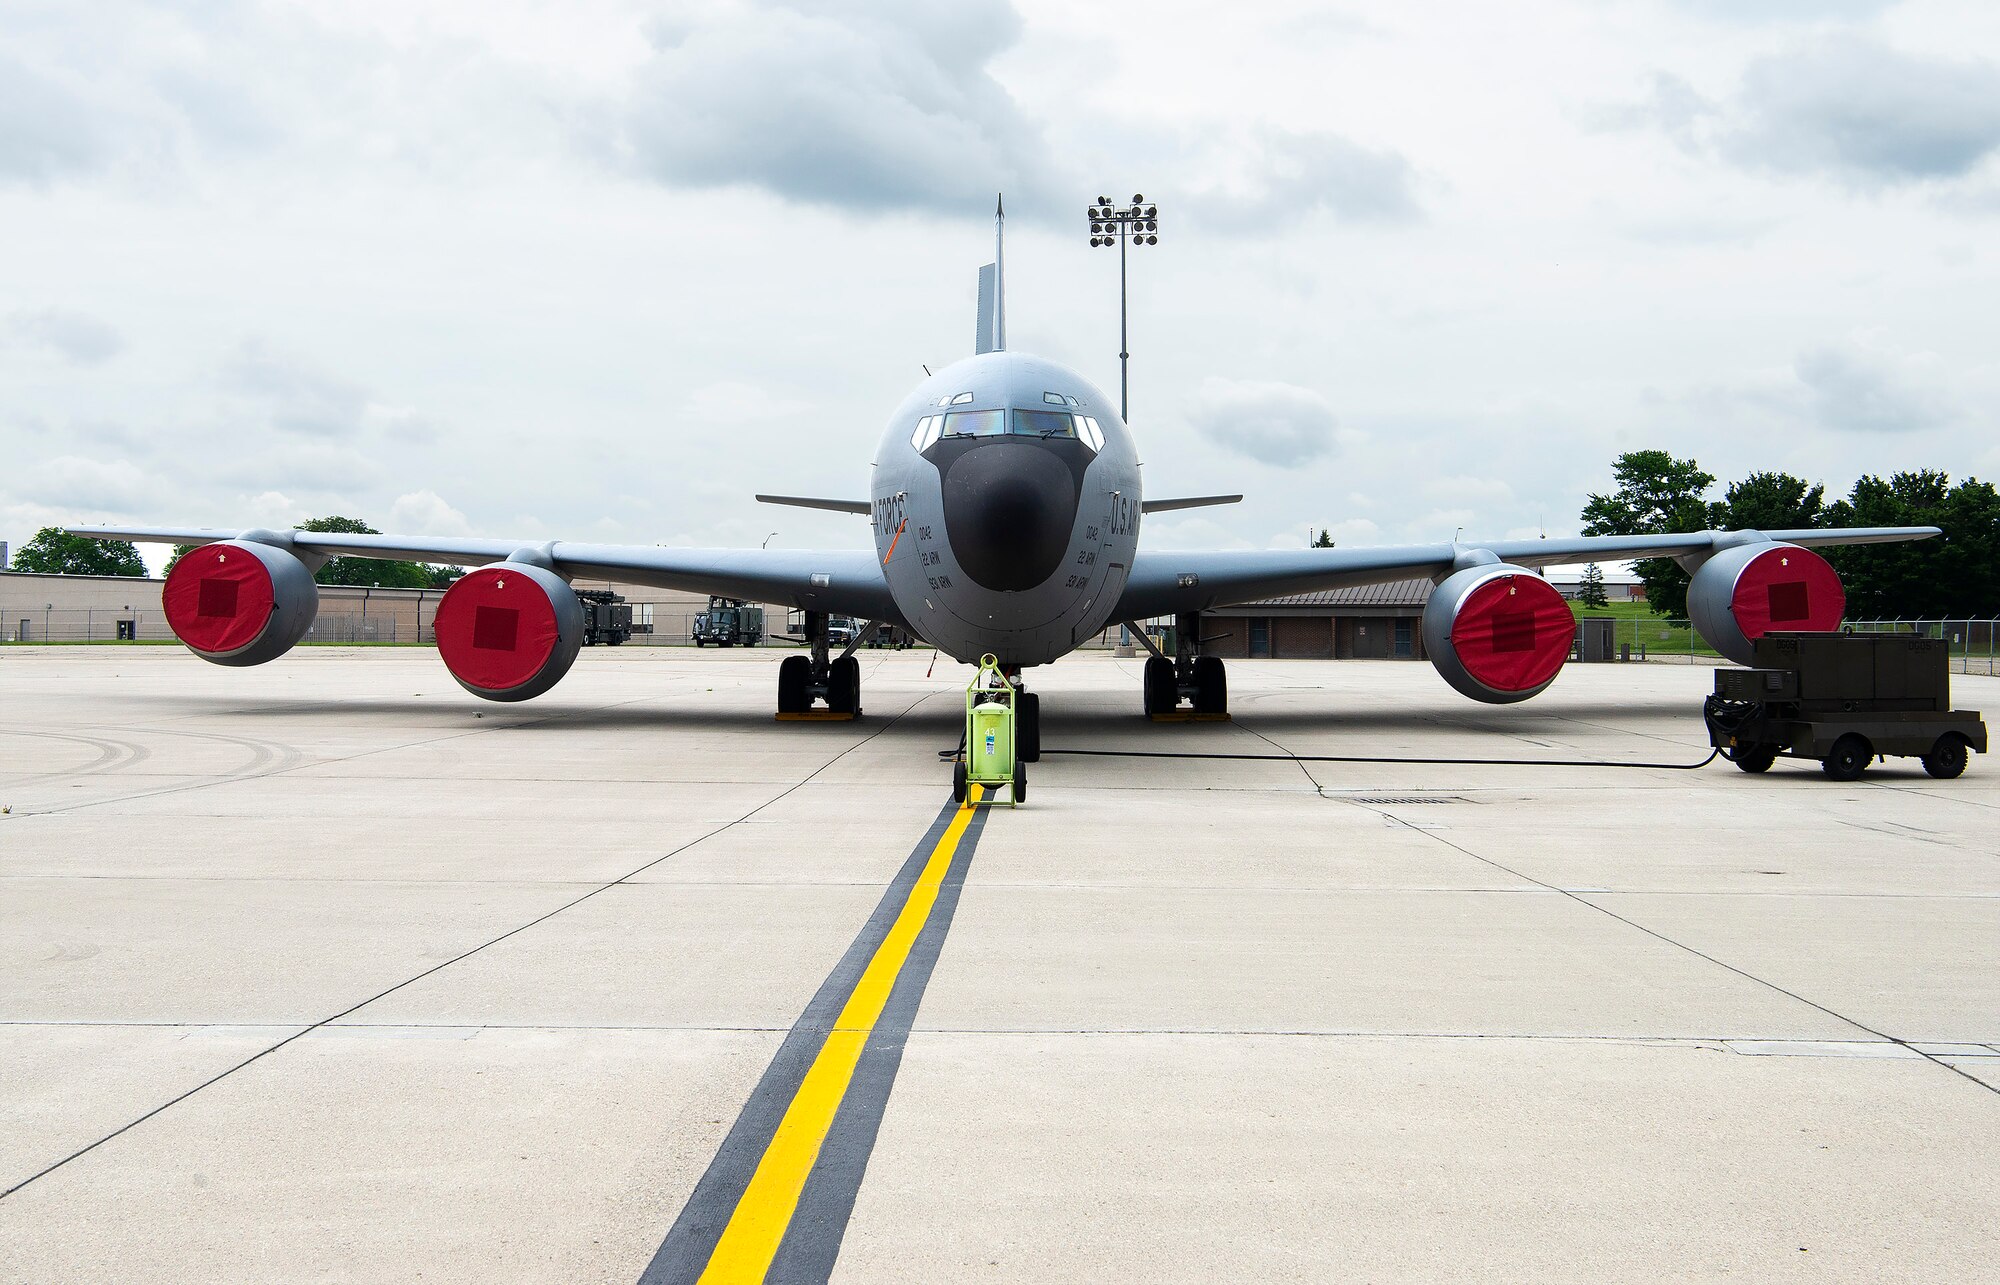 A KC-135 Stratotanker from the 22nd Air Refueling Wing at McConnell Air Force Base, Kansas, sits on the flightline, June 8, 2021 at Wright-Patterson AFB. KC-135 and KC-46 tankers and crew members will be at Wright-Patt through June 18 for a deployment exercise, which includes night-time aerial-refueling training. (U.S. Air Force photo by R.J. Oriez)